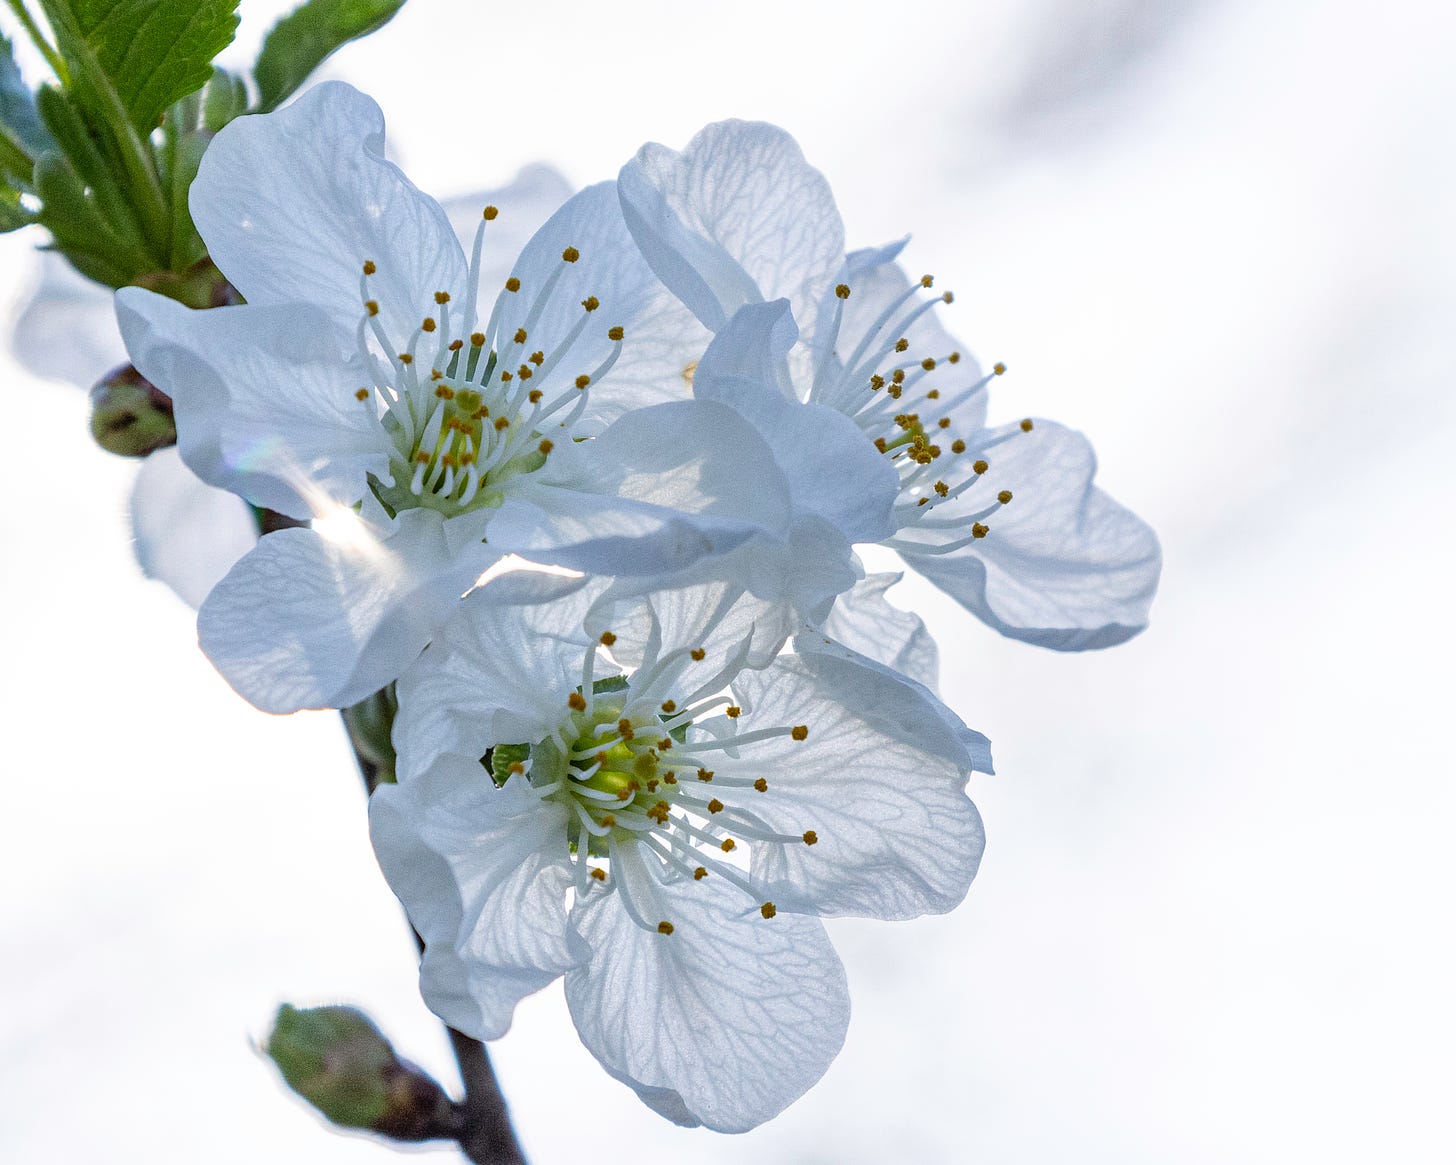 In this image, white apple blossoms are in the foreground. The petals are extremely delicate.